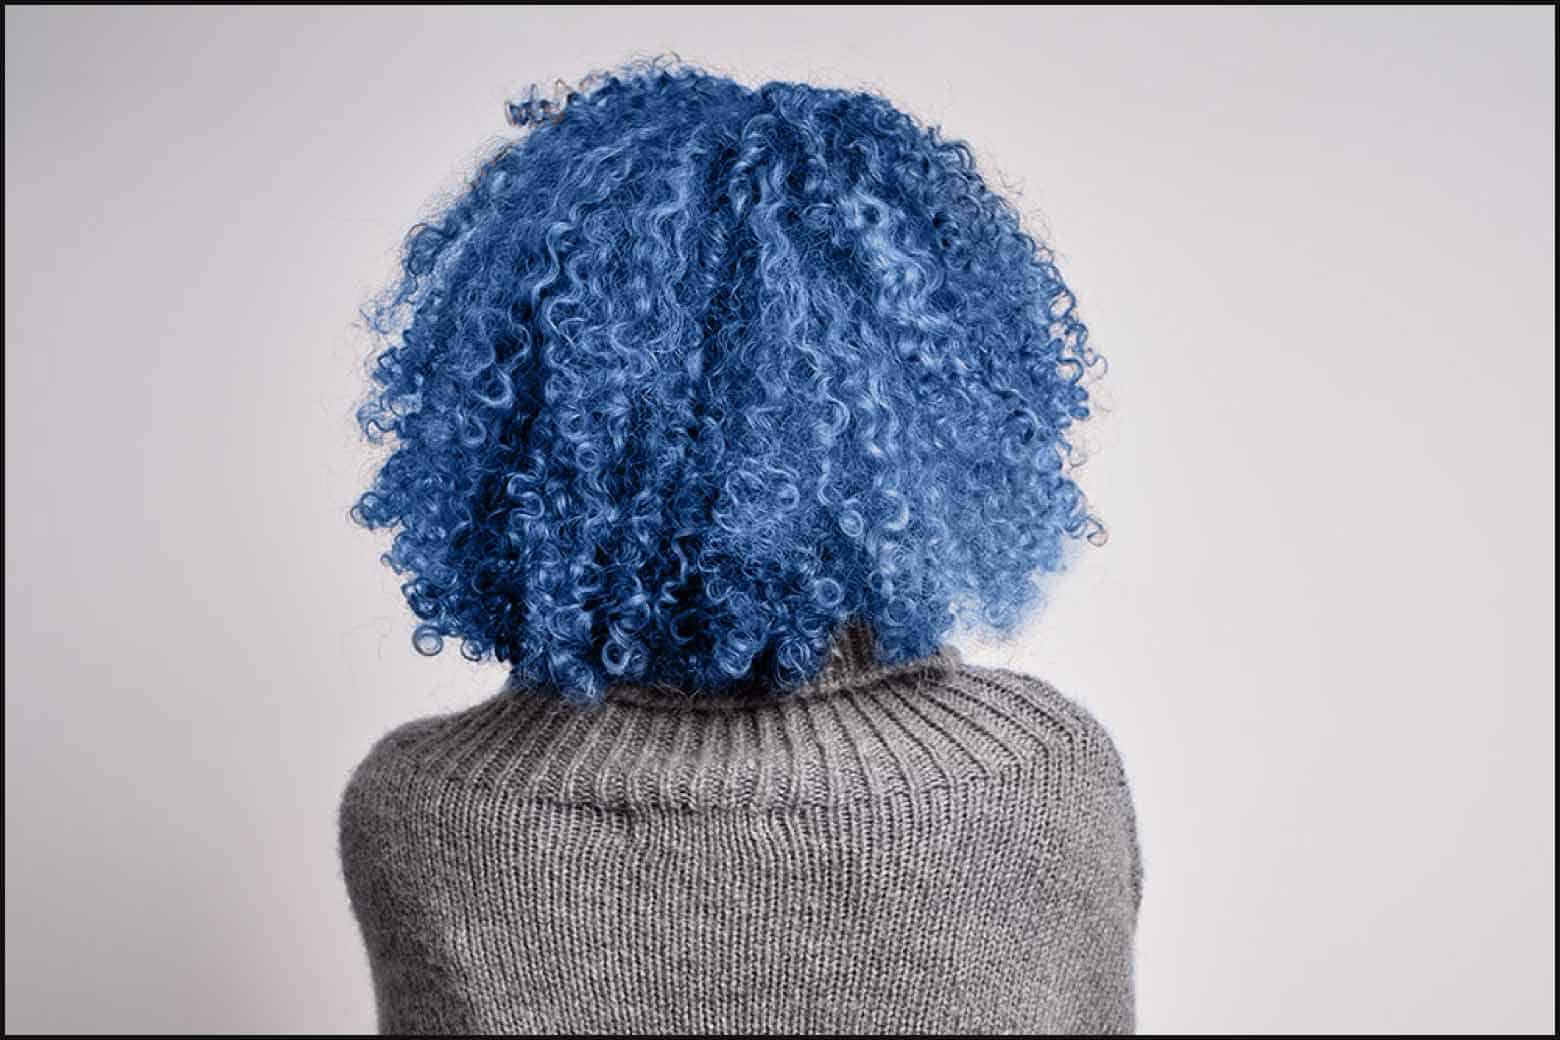 back of a person with curly blue hair and a grey sweater